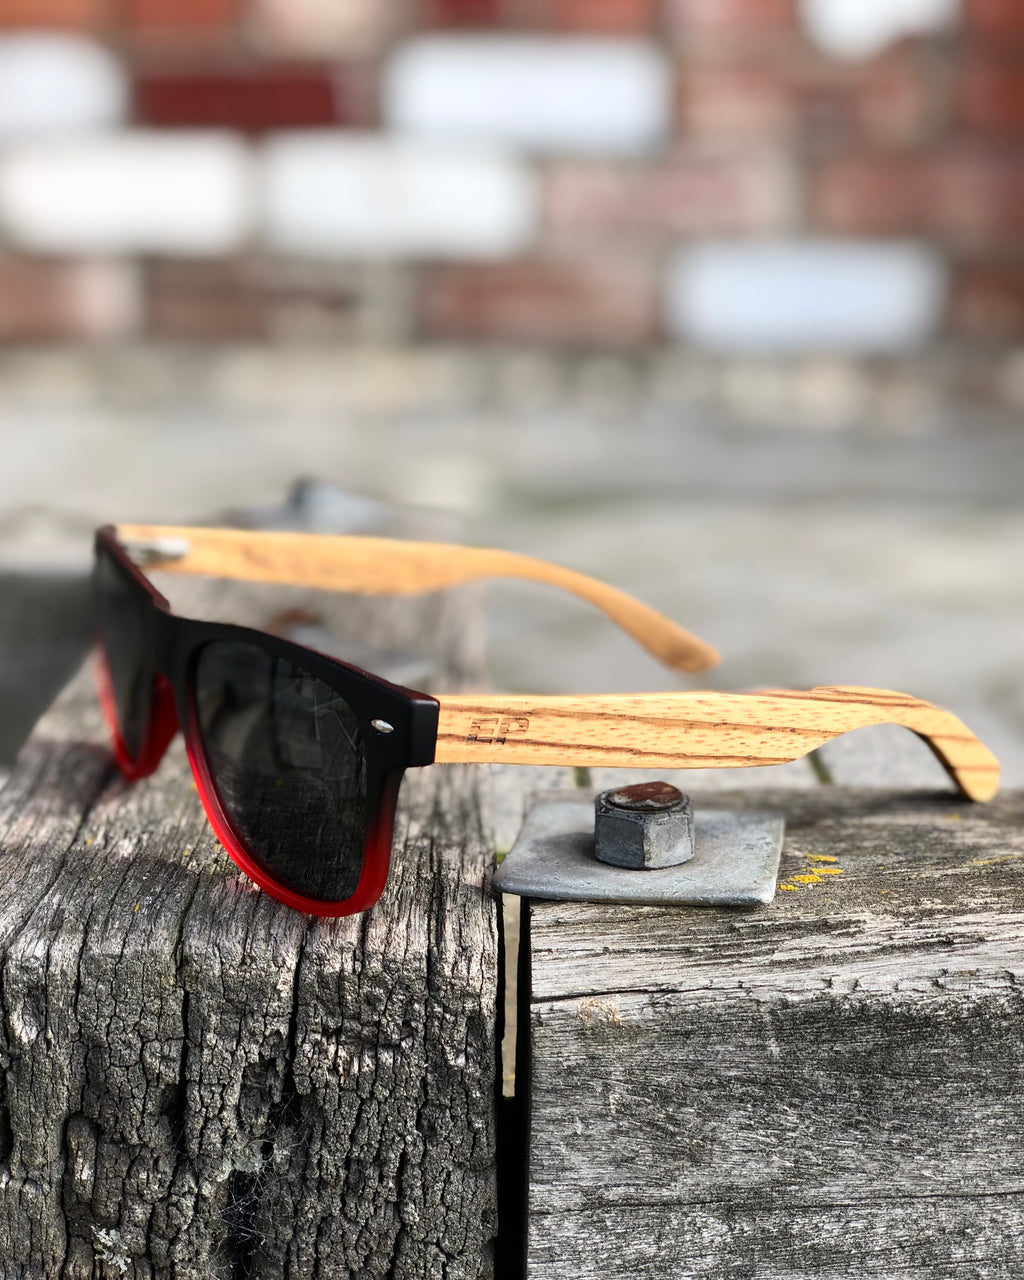 Electric Pukeko Sunglasses - Gradient Black to Red Frames with Zebrano Wood Arms